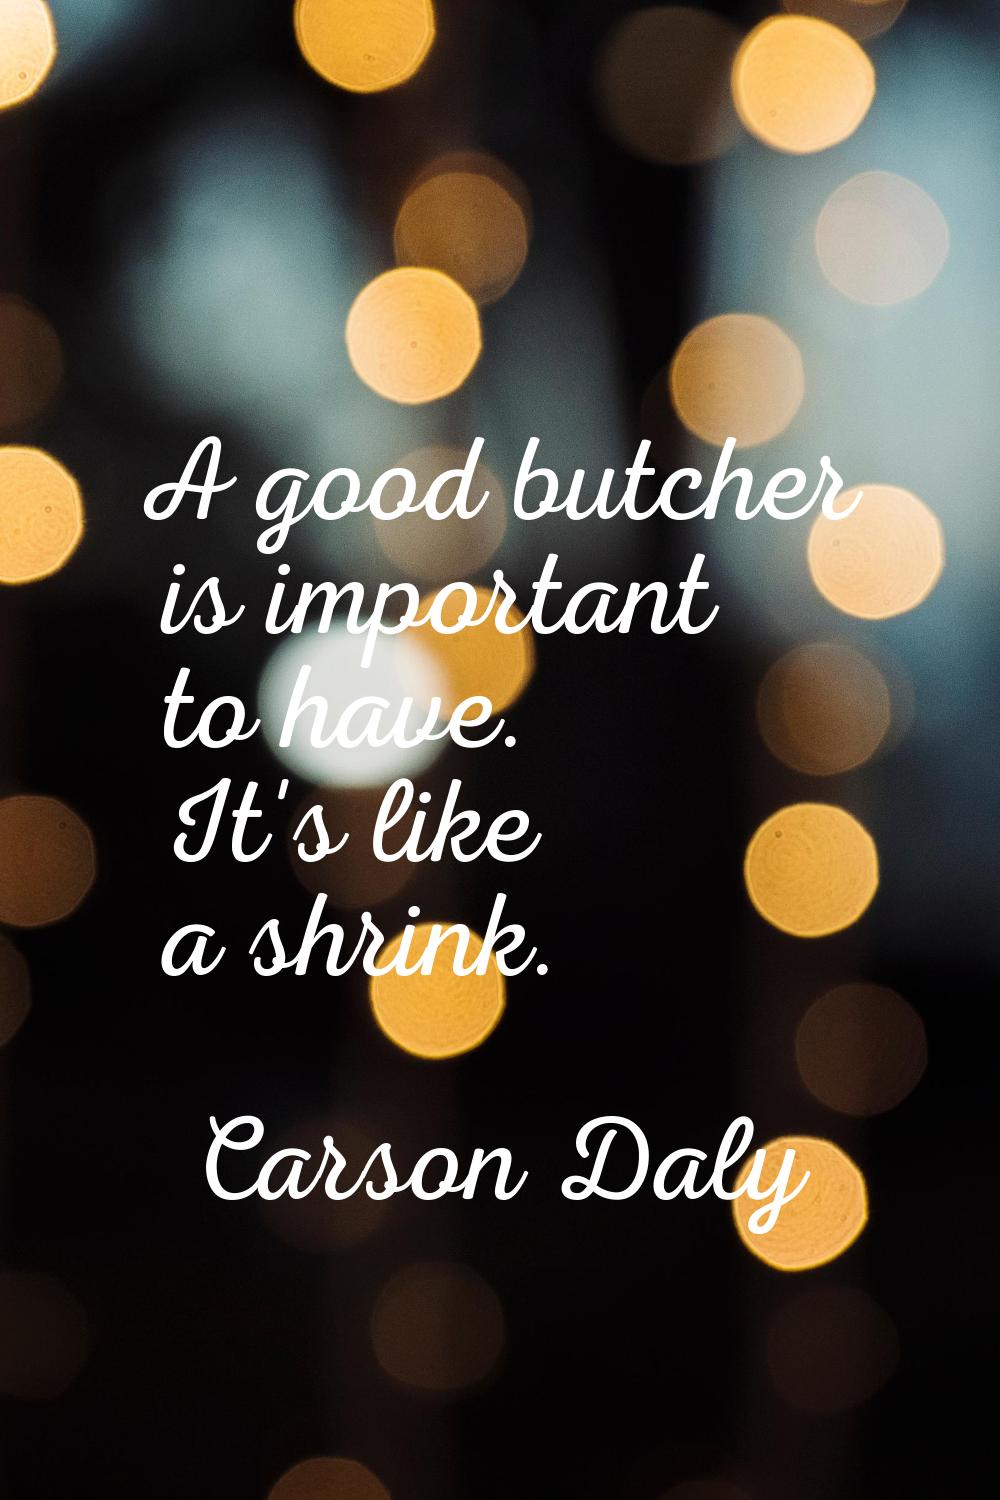 A good butcher is important to have. It's like a shrink.